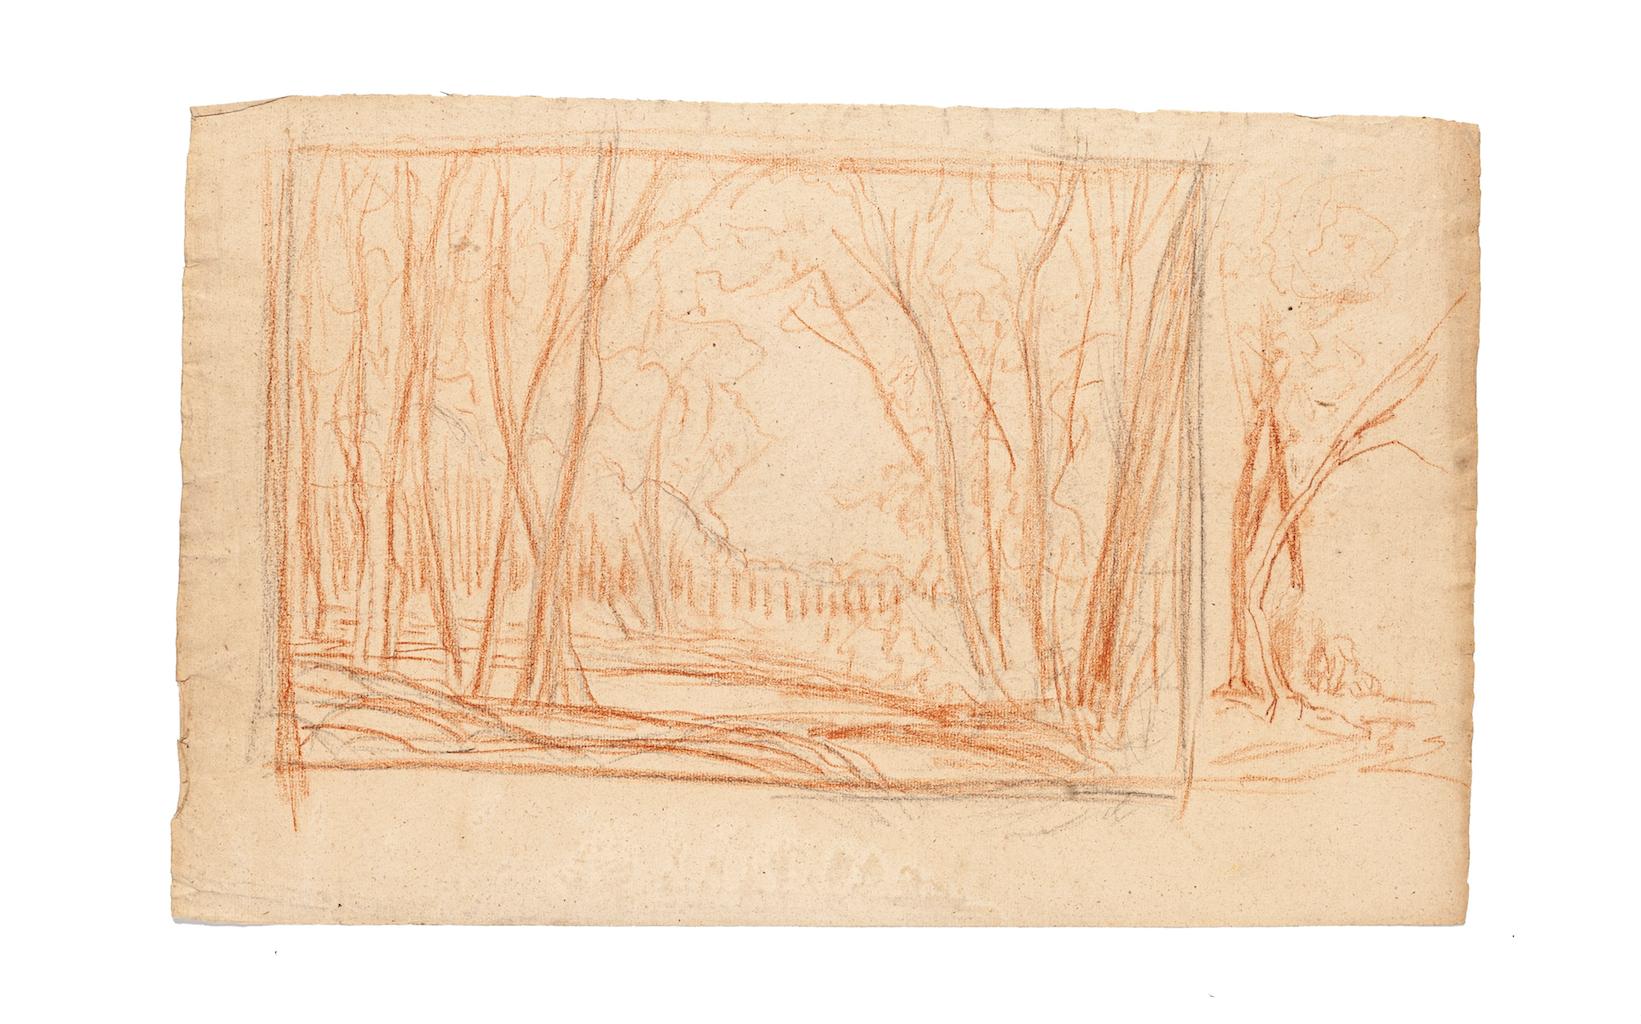 Landscape - Original Drawing in Pencil and Sanguine on Paper - 19th Century